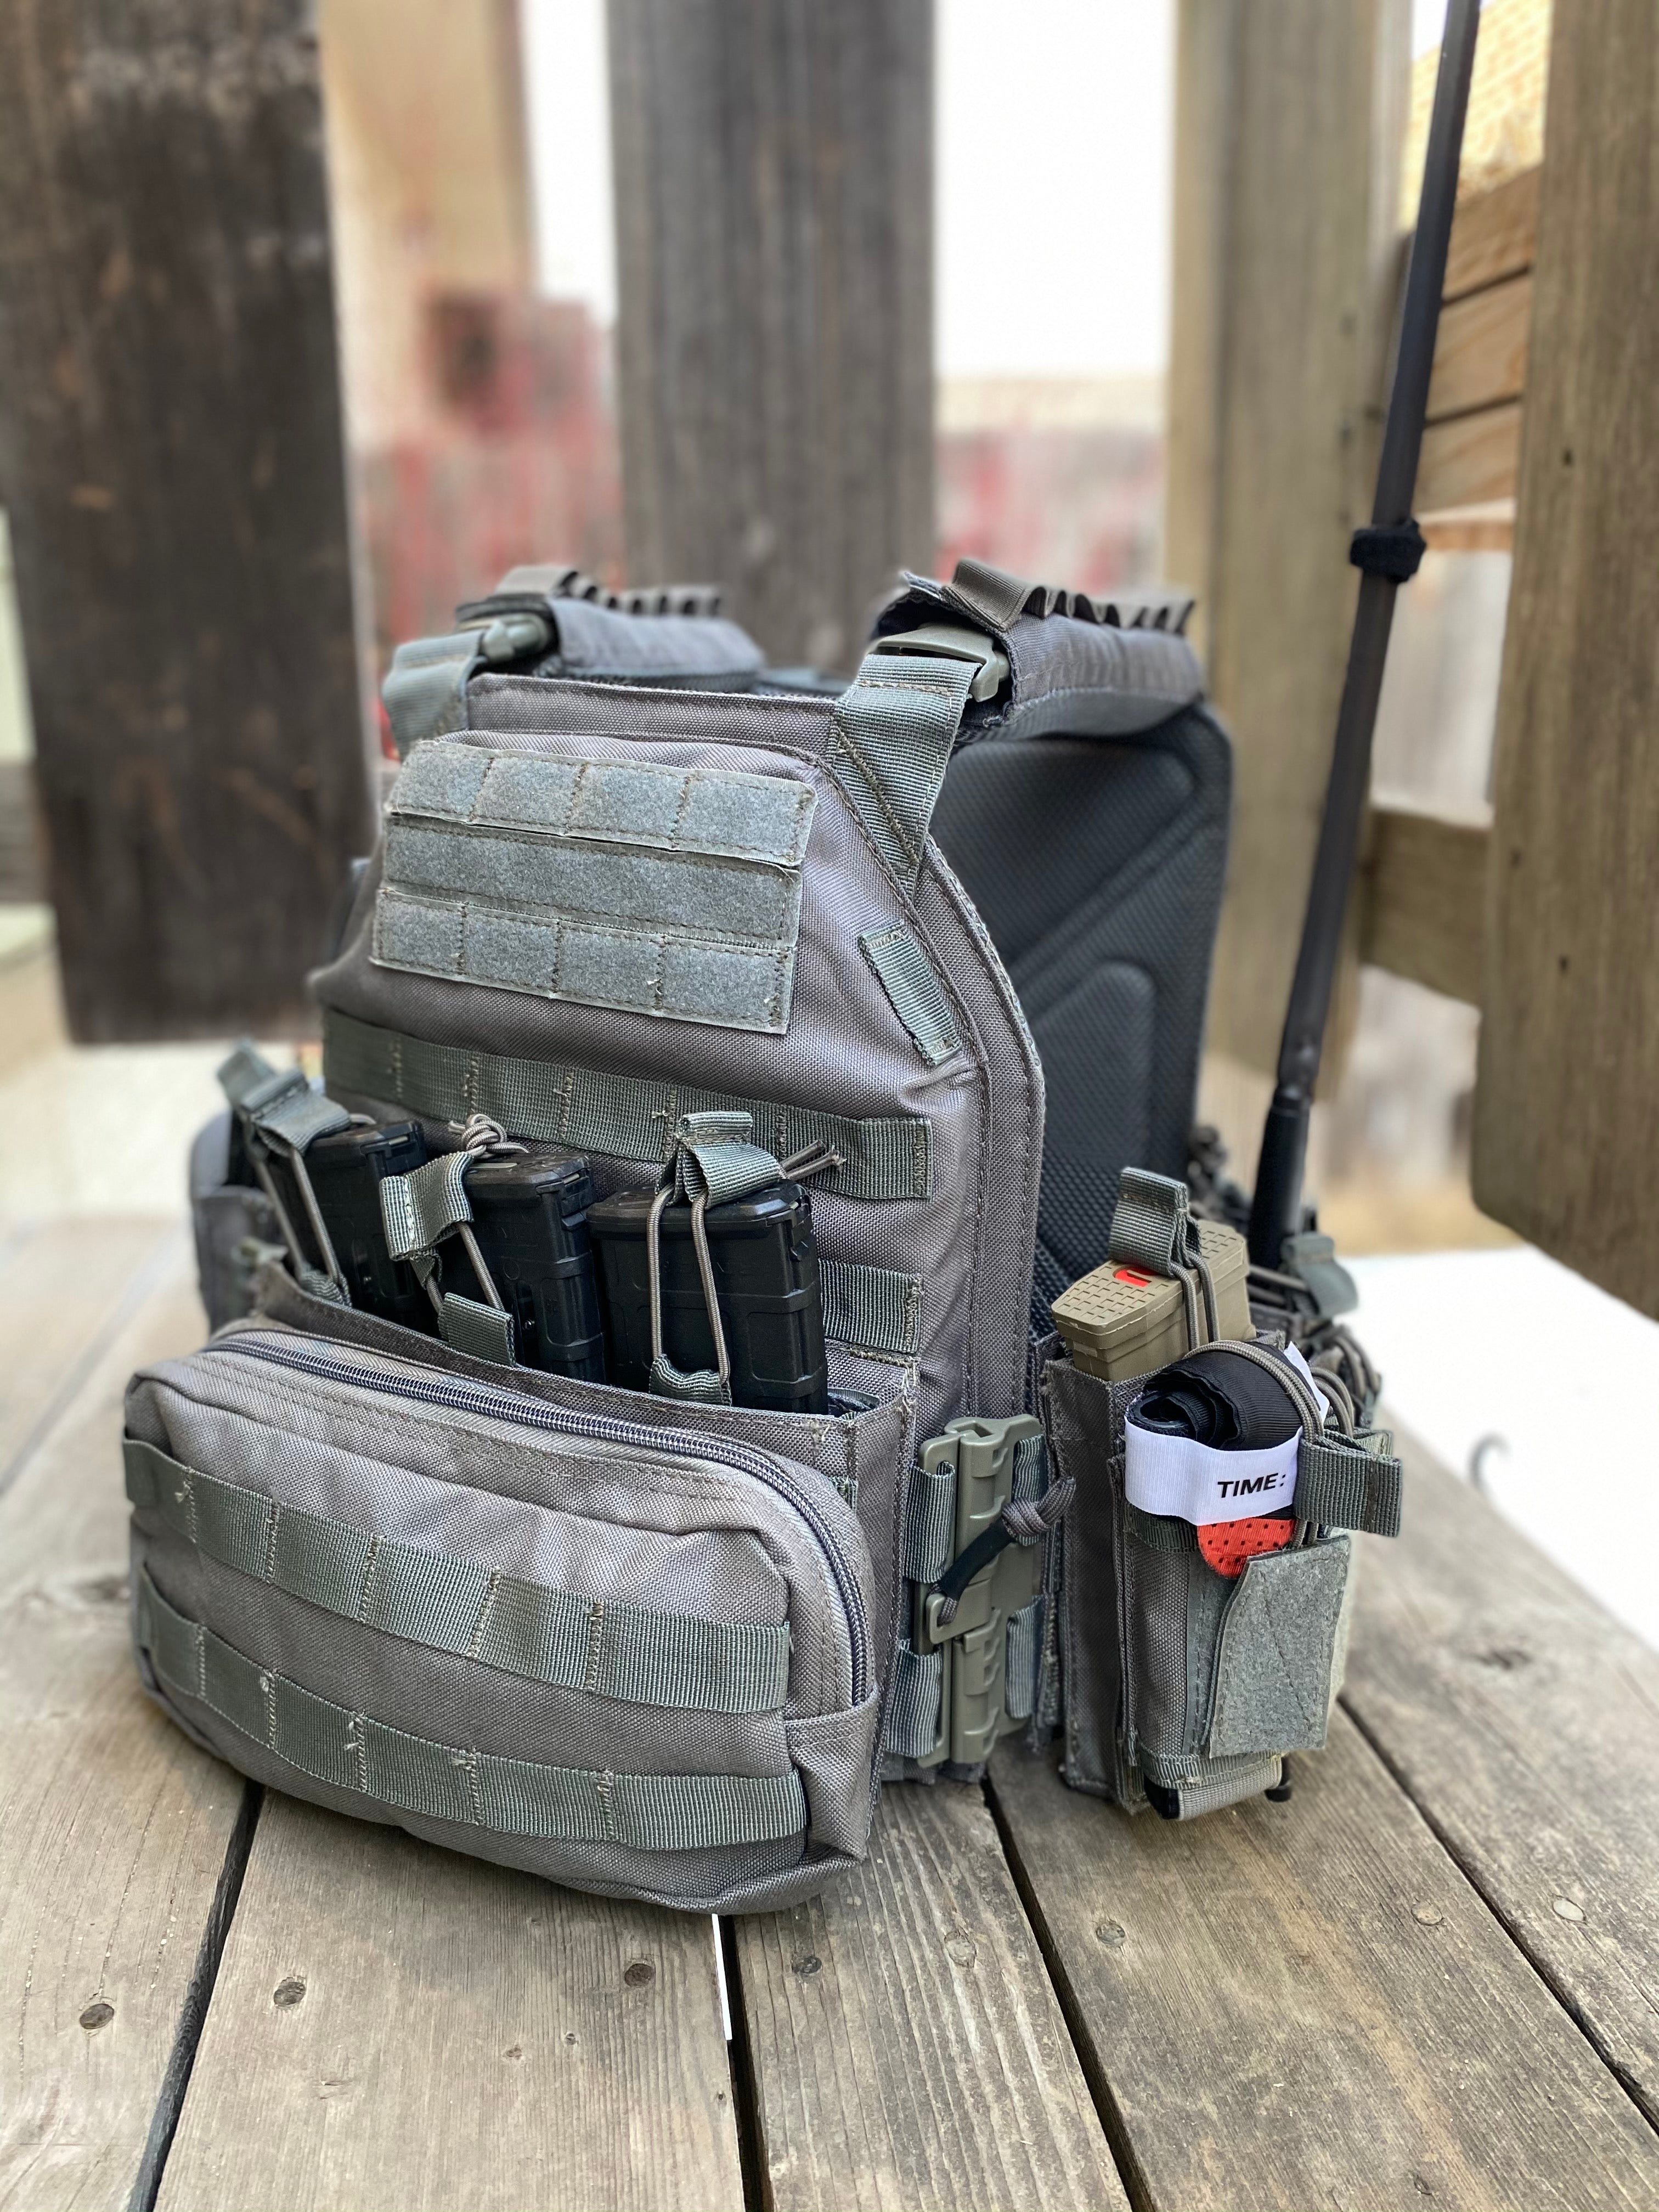 The YK-1 Plate Carrier